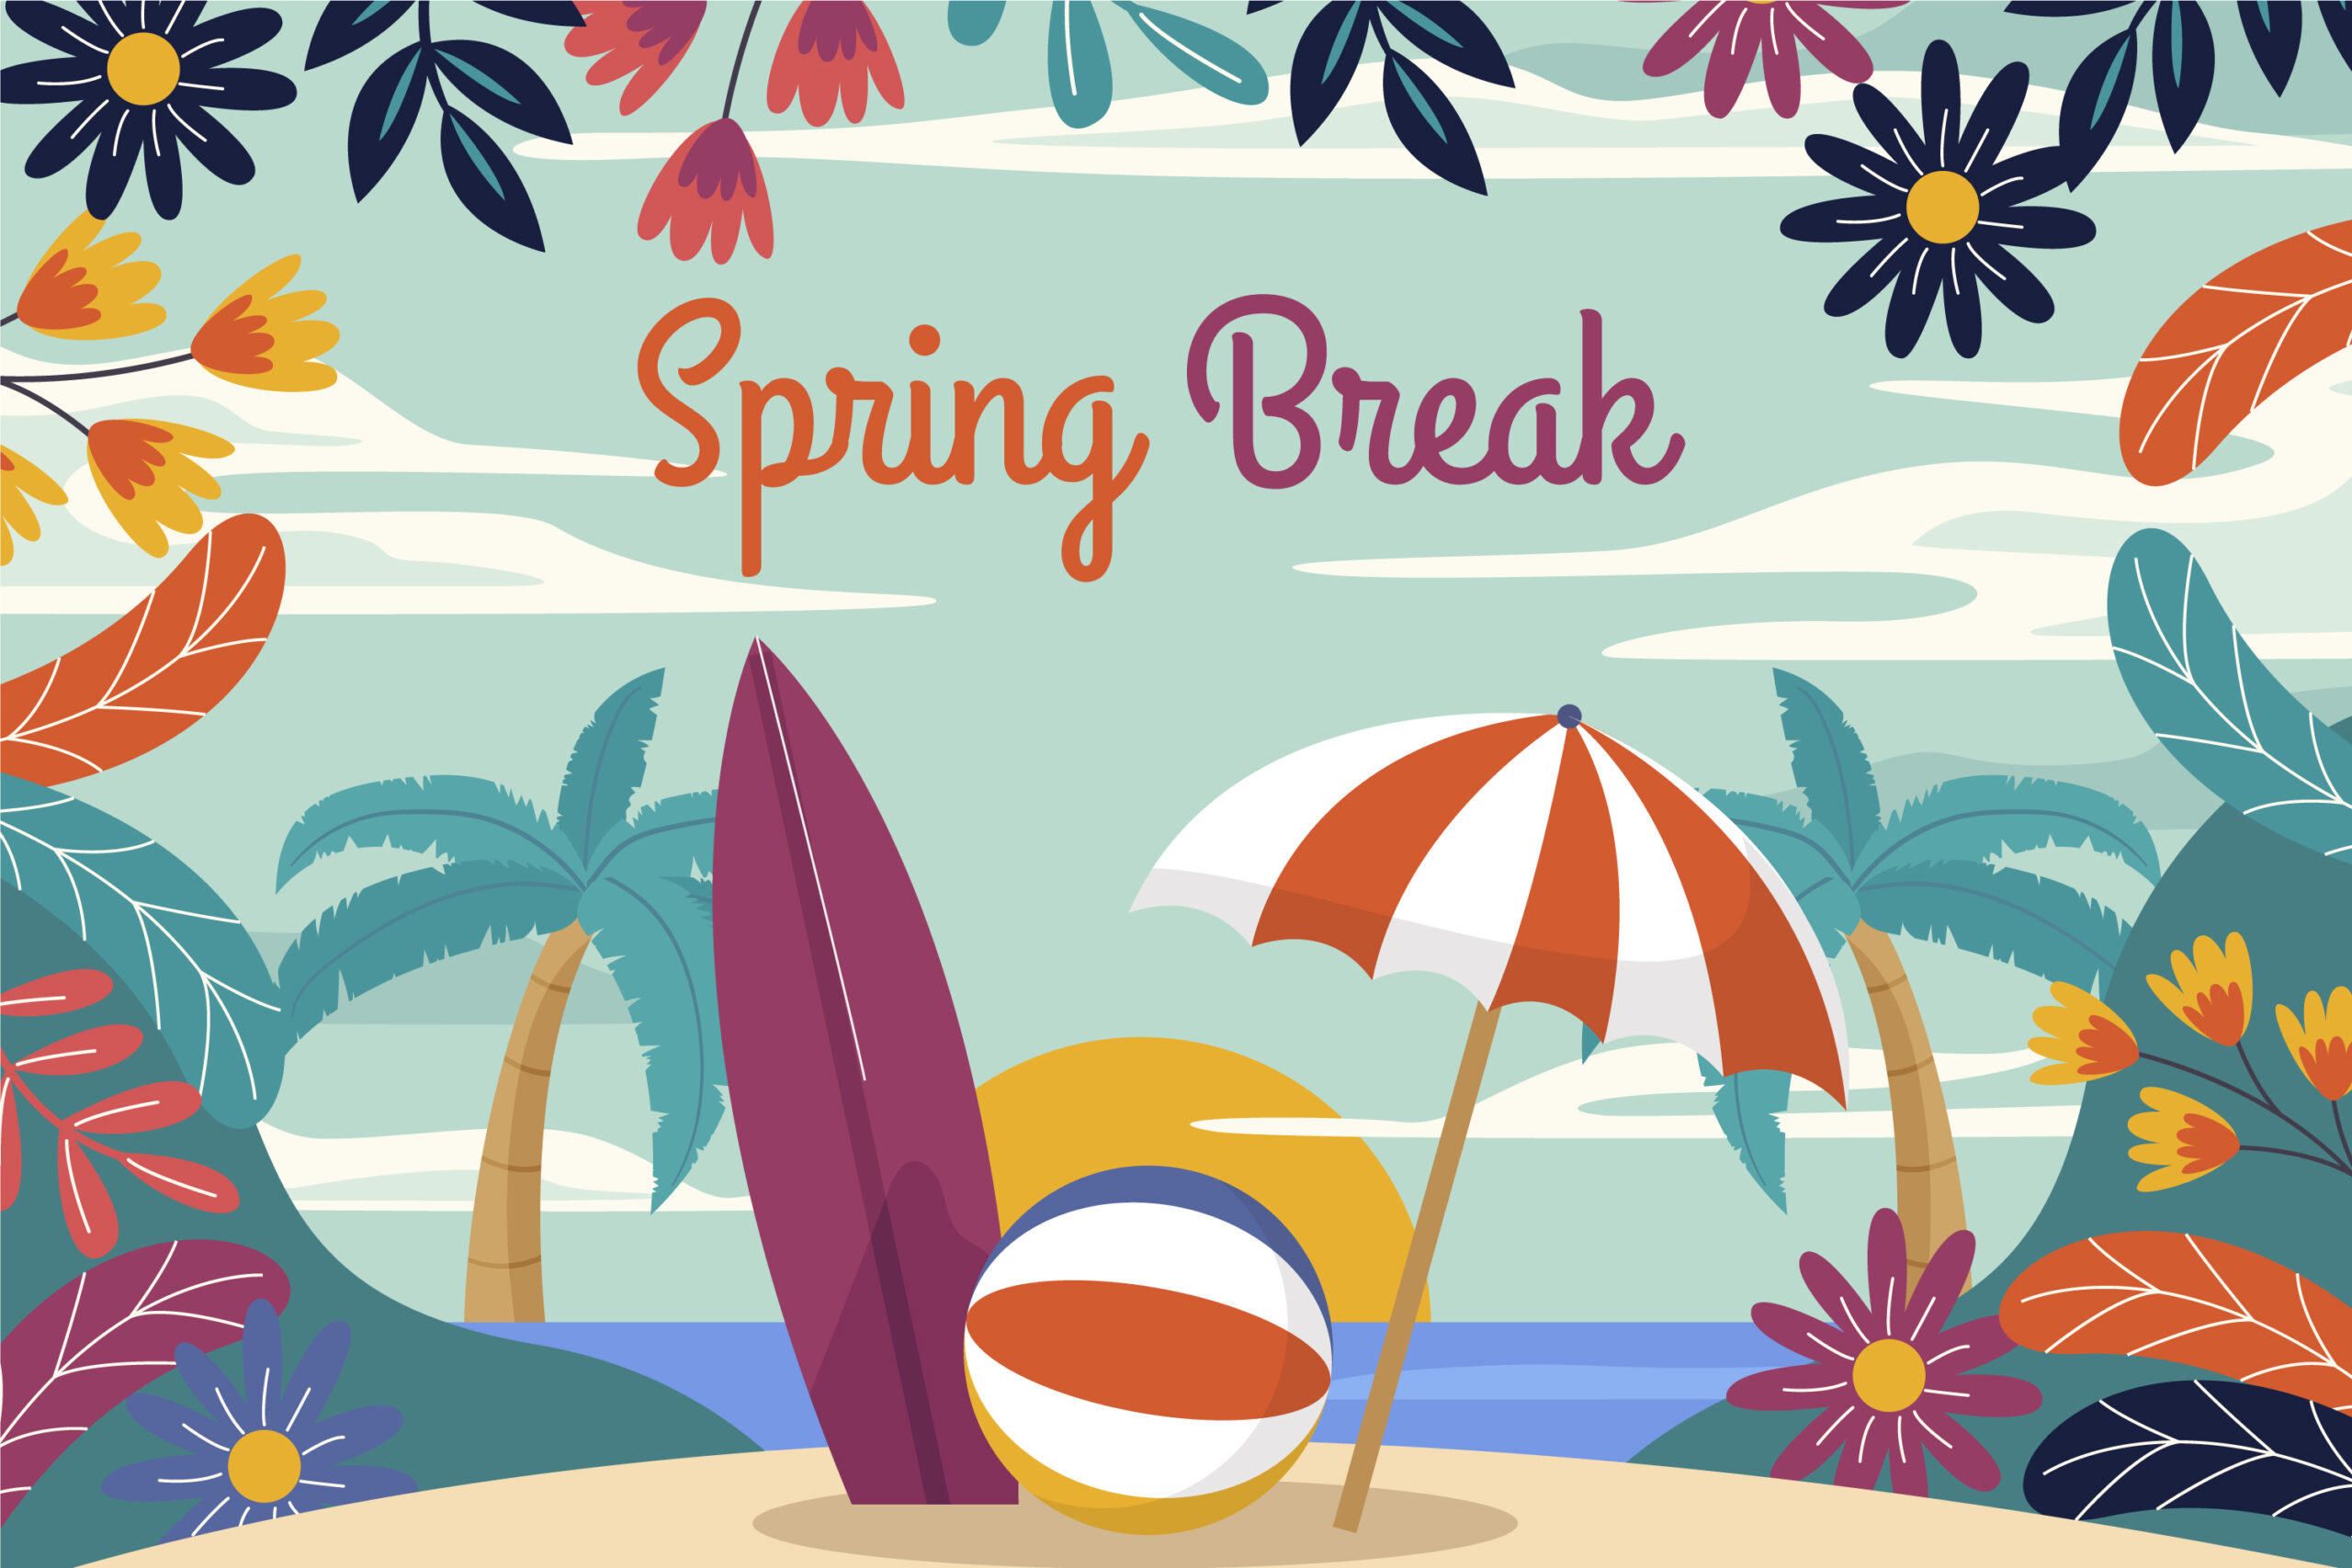 Read more about SFCC to close March 20-24 for spring break